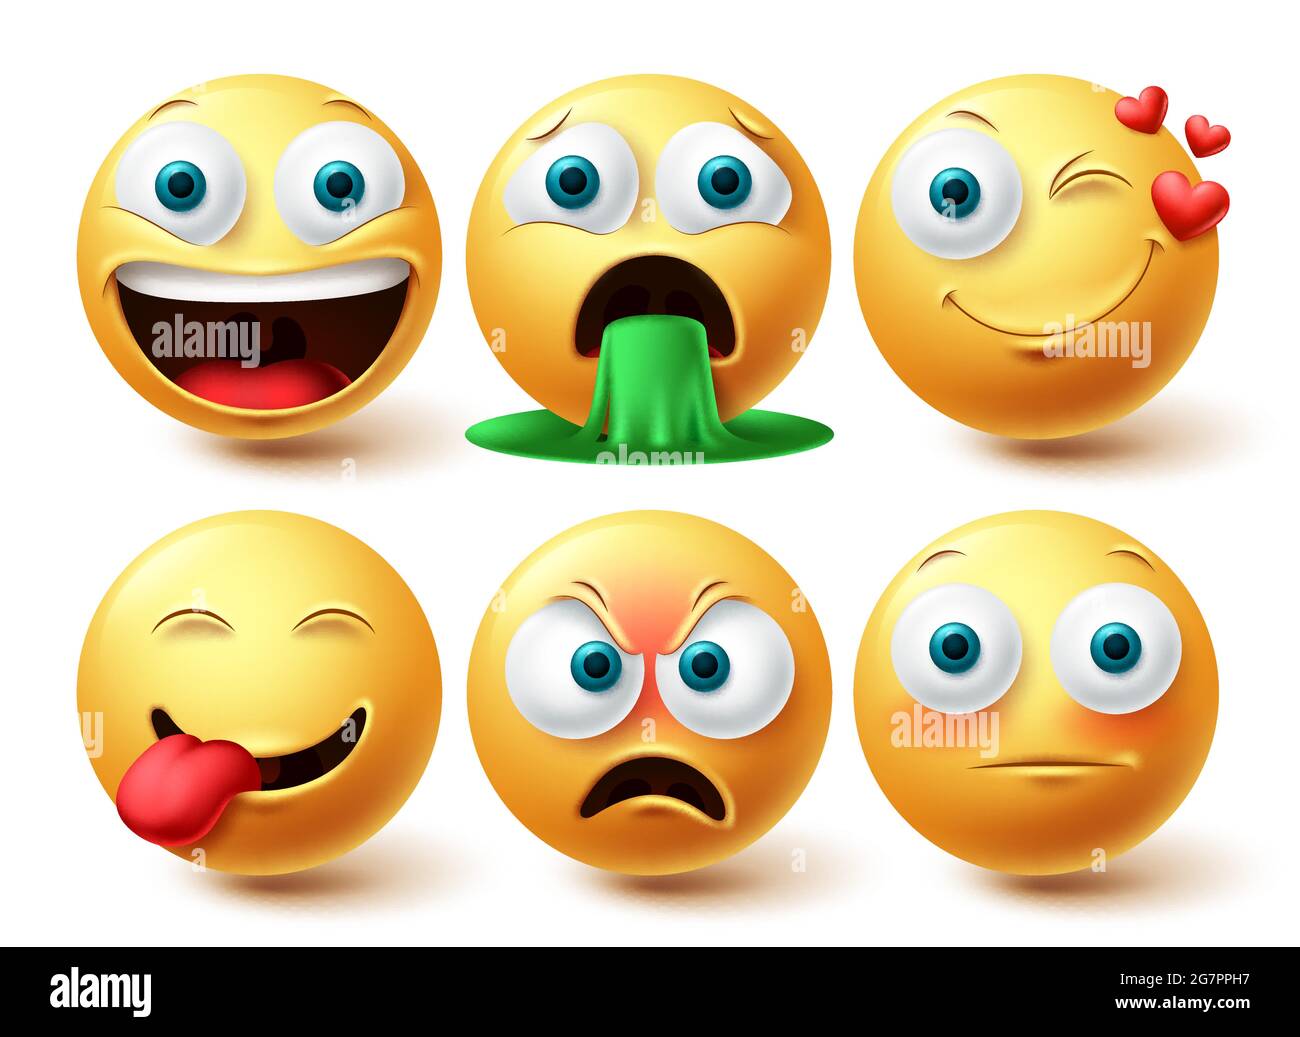 Emoji smileys vector set. Smileys emoticon happy, winking and angry face collection facial expressions isolated in white background for graphic design Stock Vector